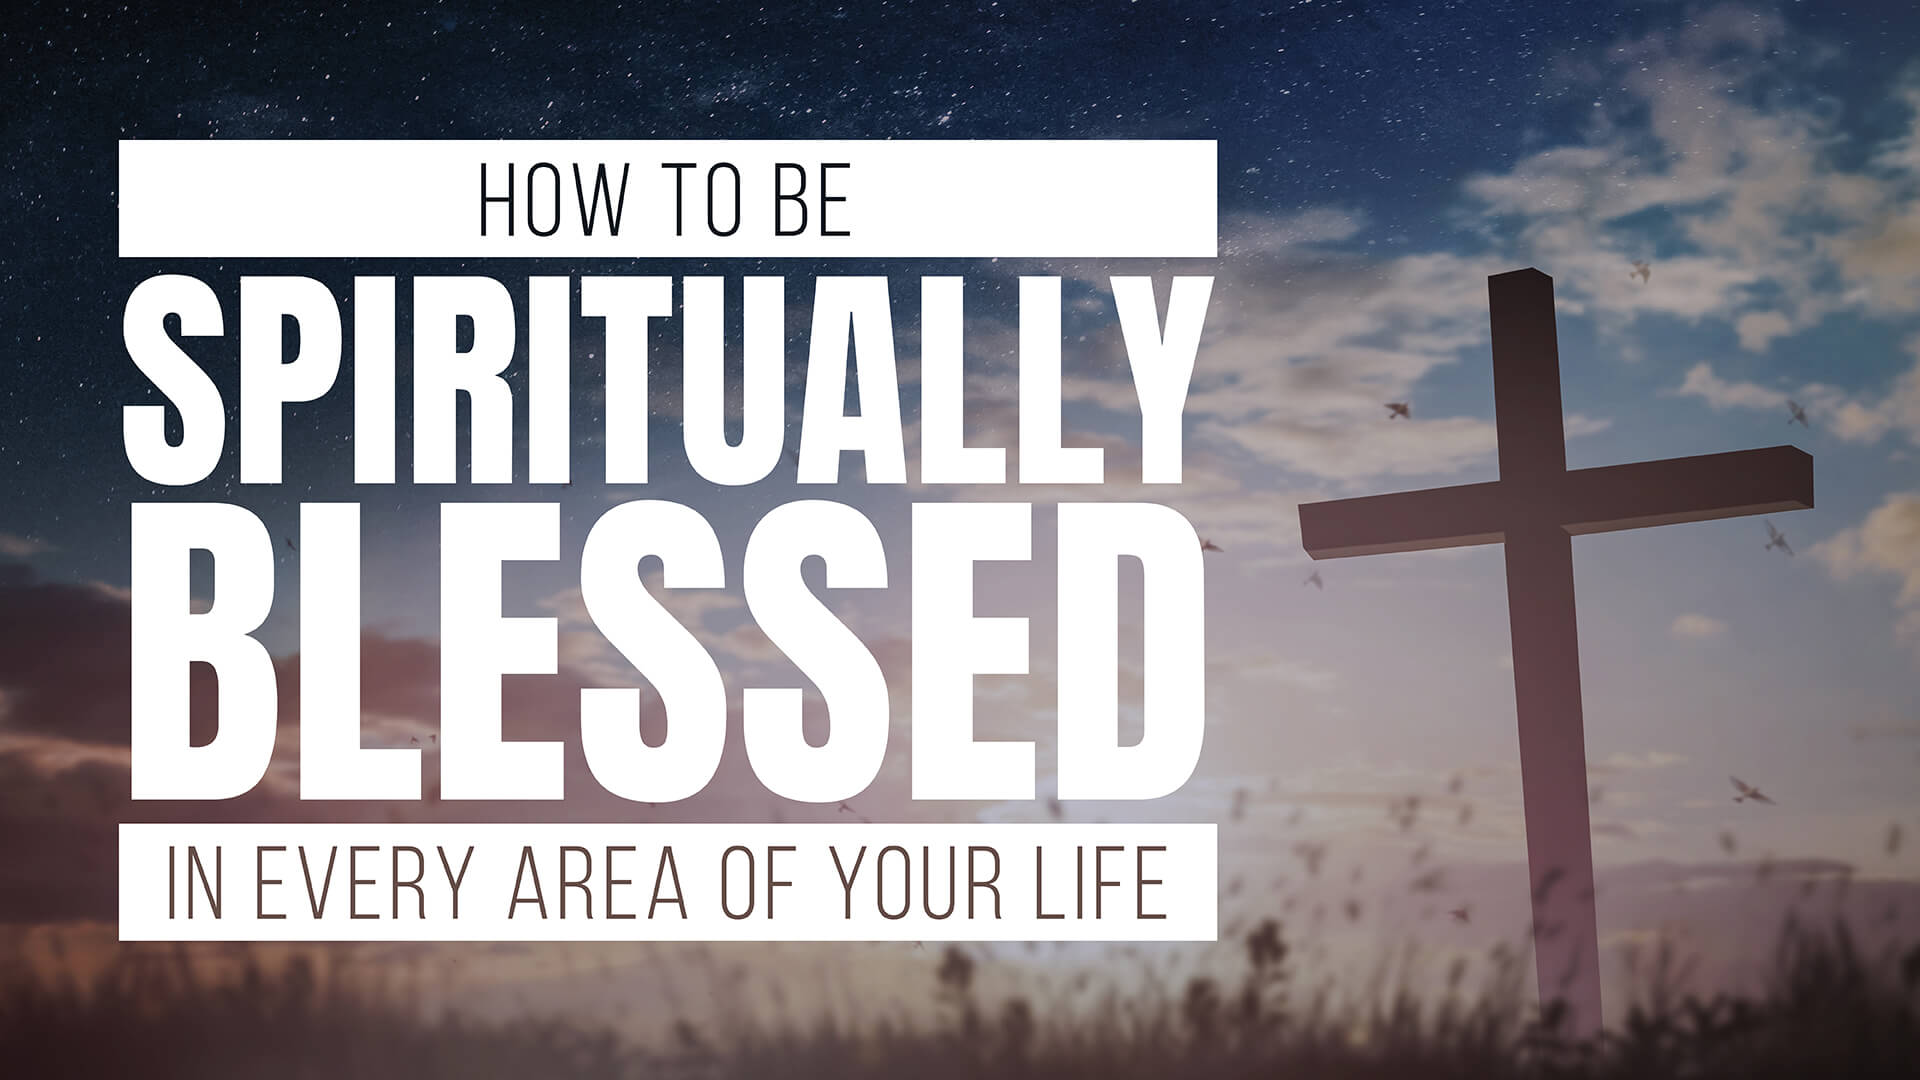 How to Be Spiritually Blessed in Every Area of Your Life